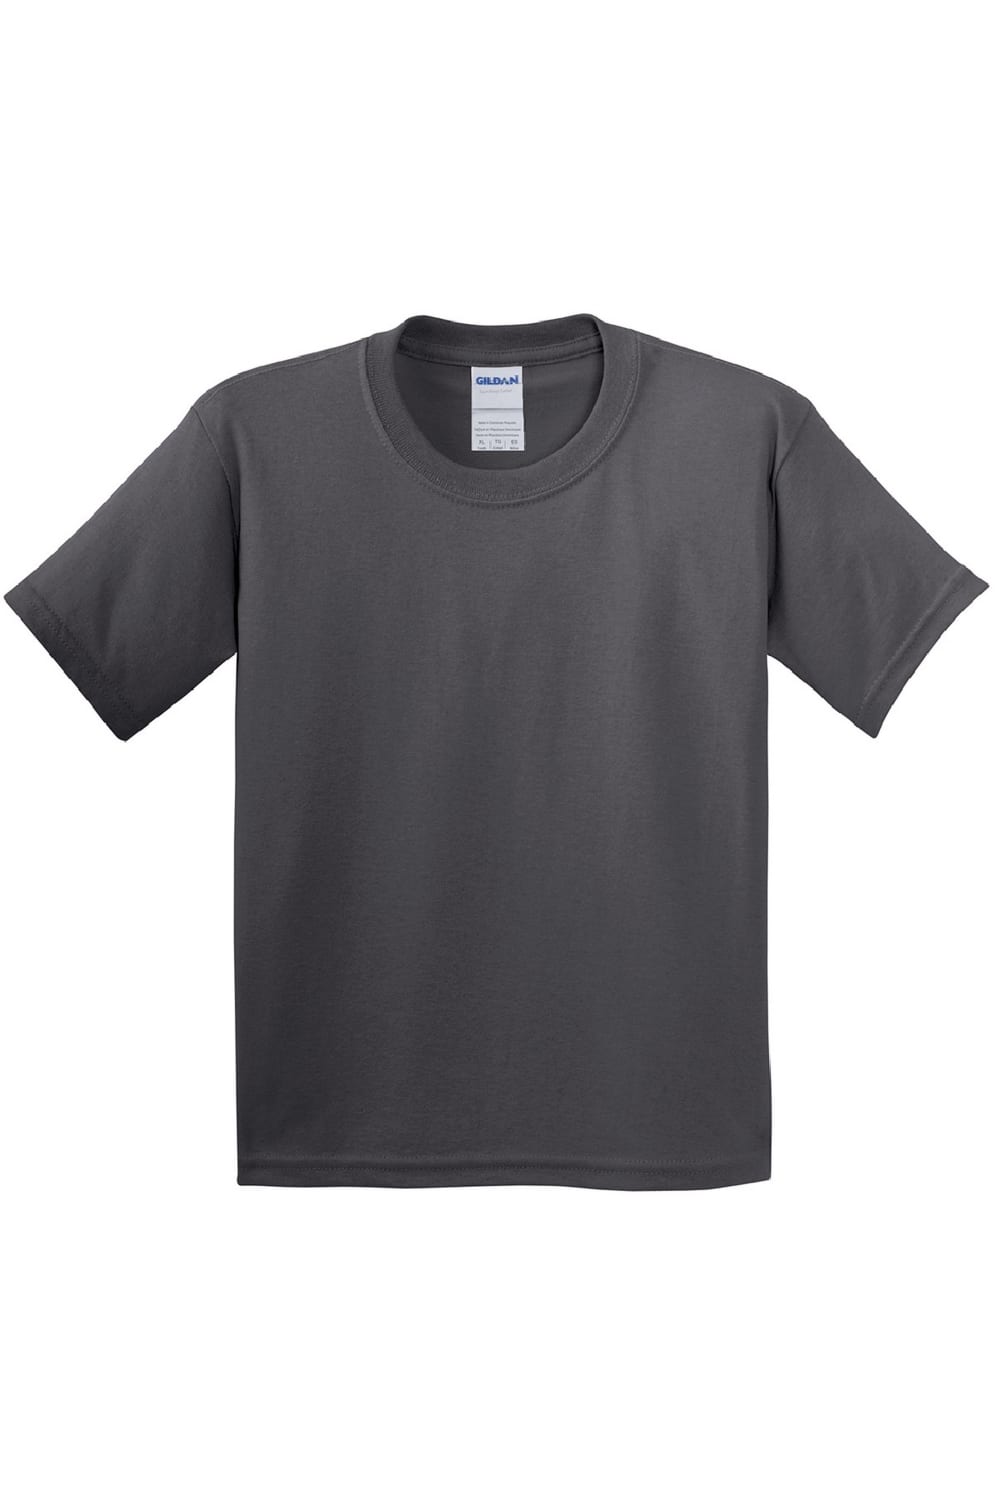 Childrens Unisex Soft Style T-Shirt - Charcoal